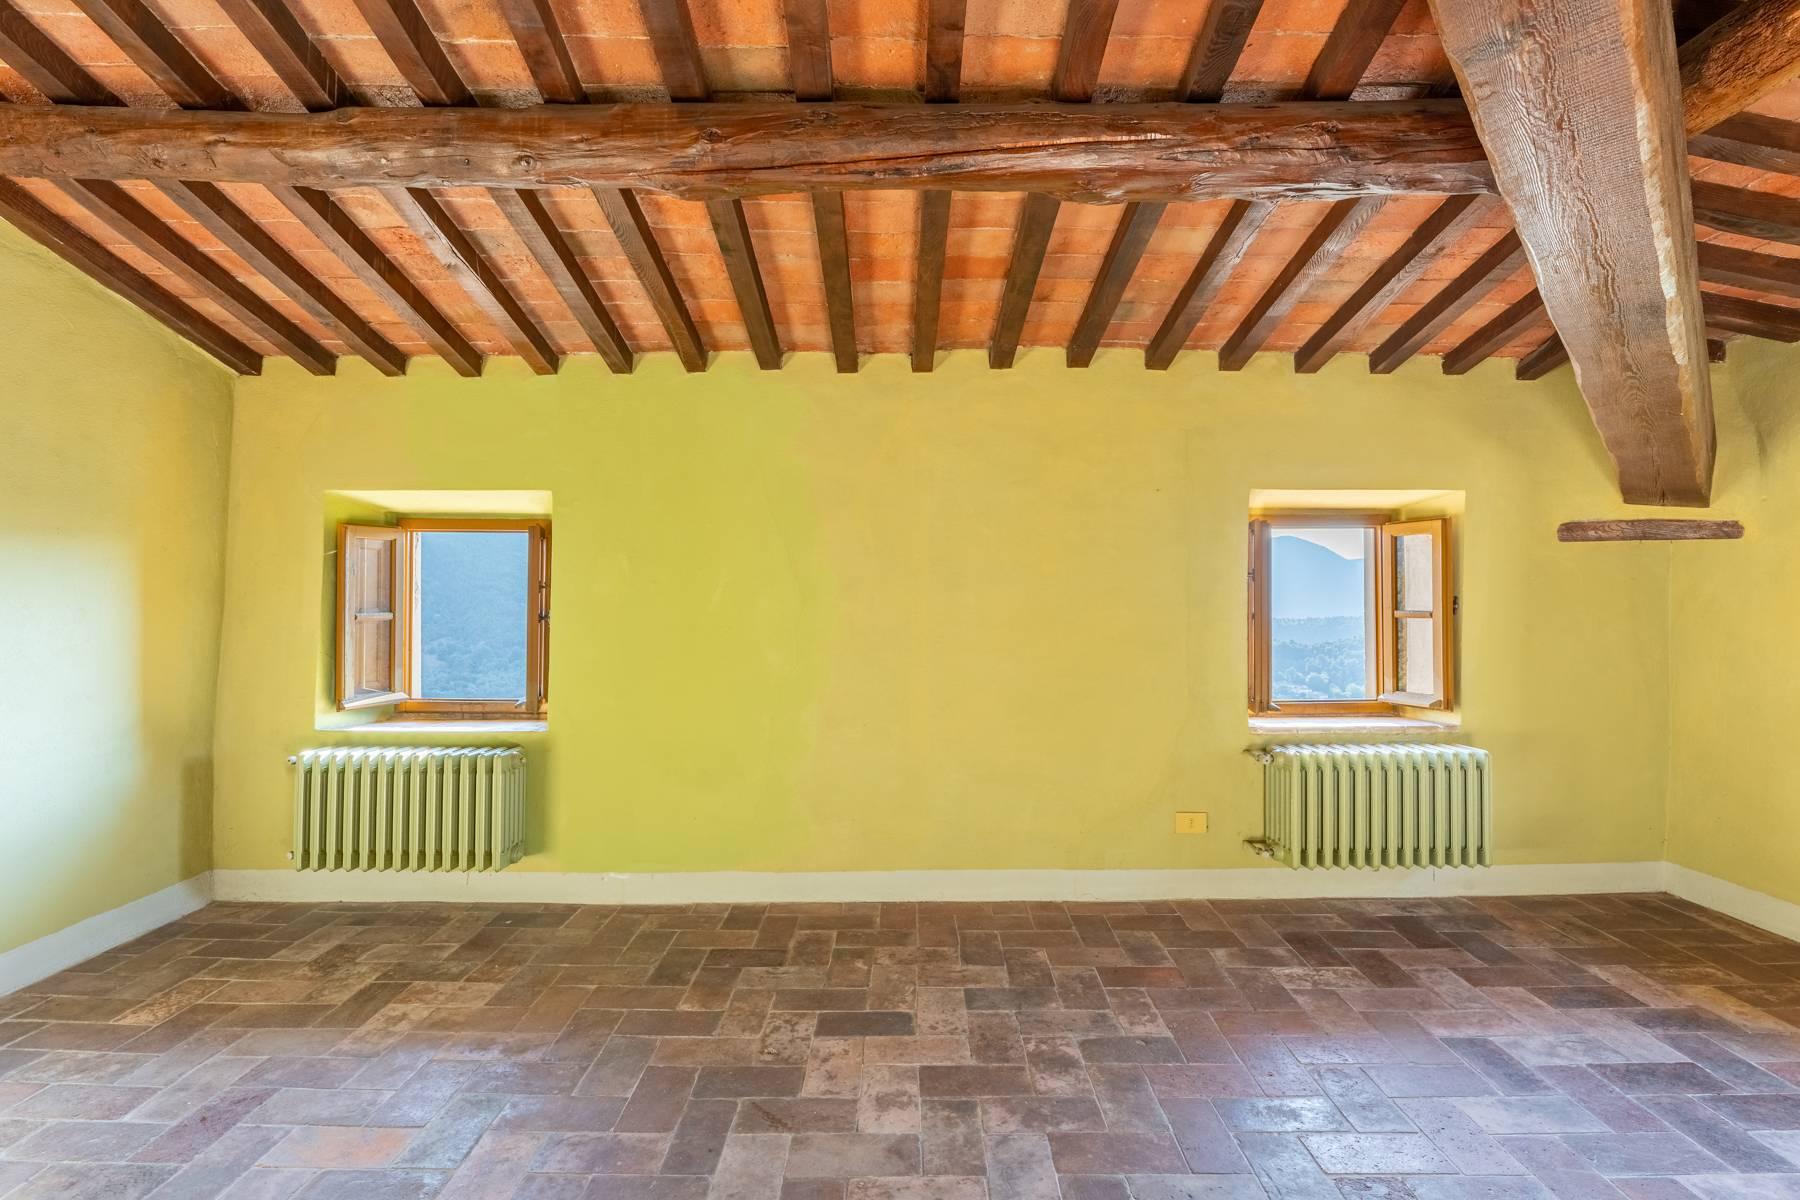 Superb villa with breathtaking views of the Lucca countryside - 20